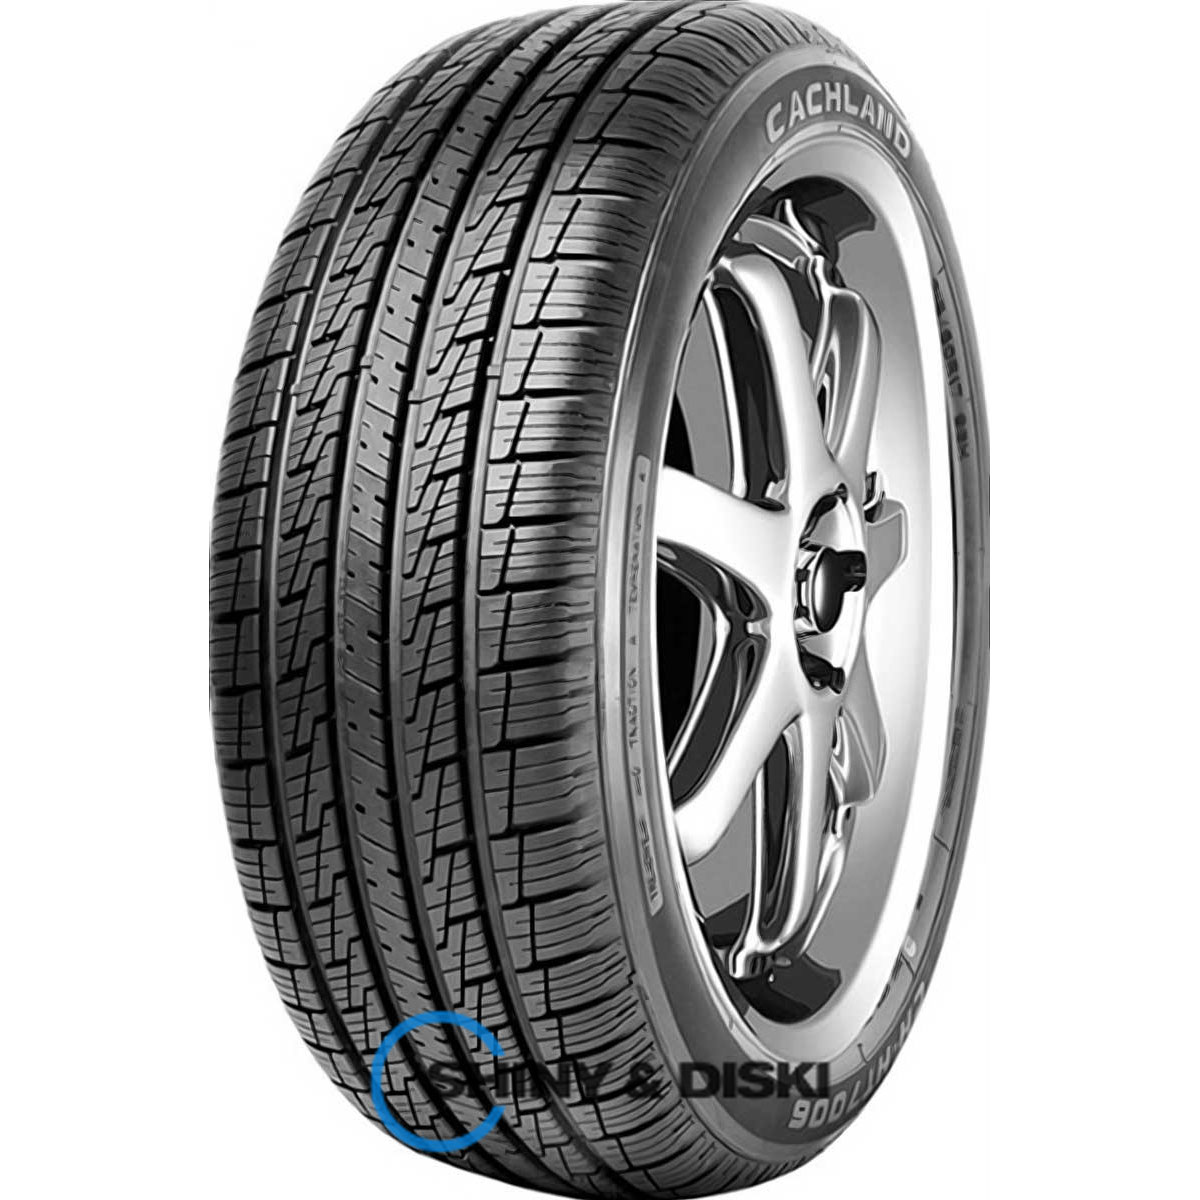 cachland ch-ht7006 255/70 r16 111t